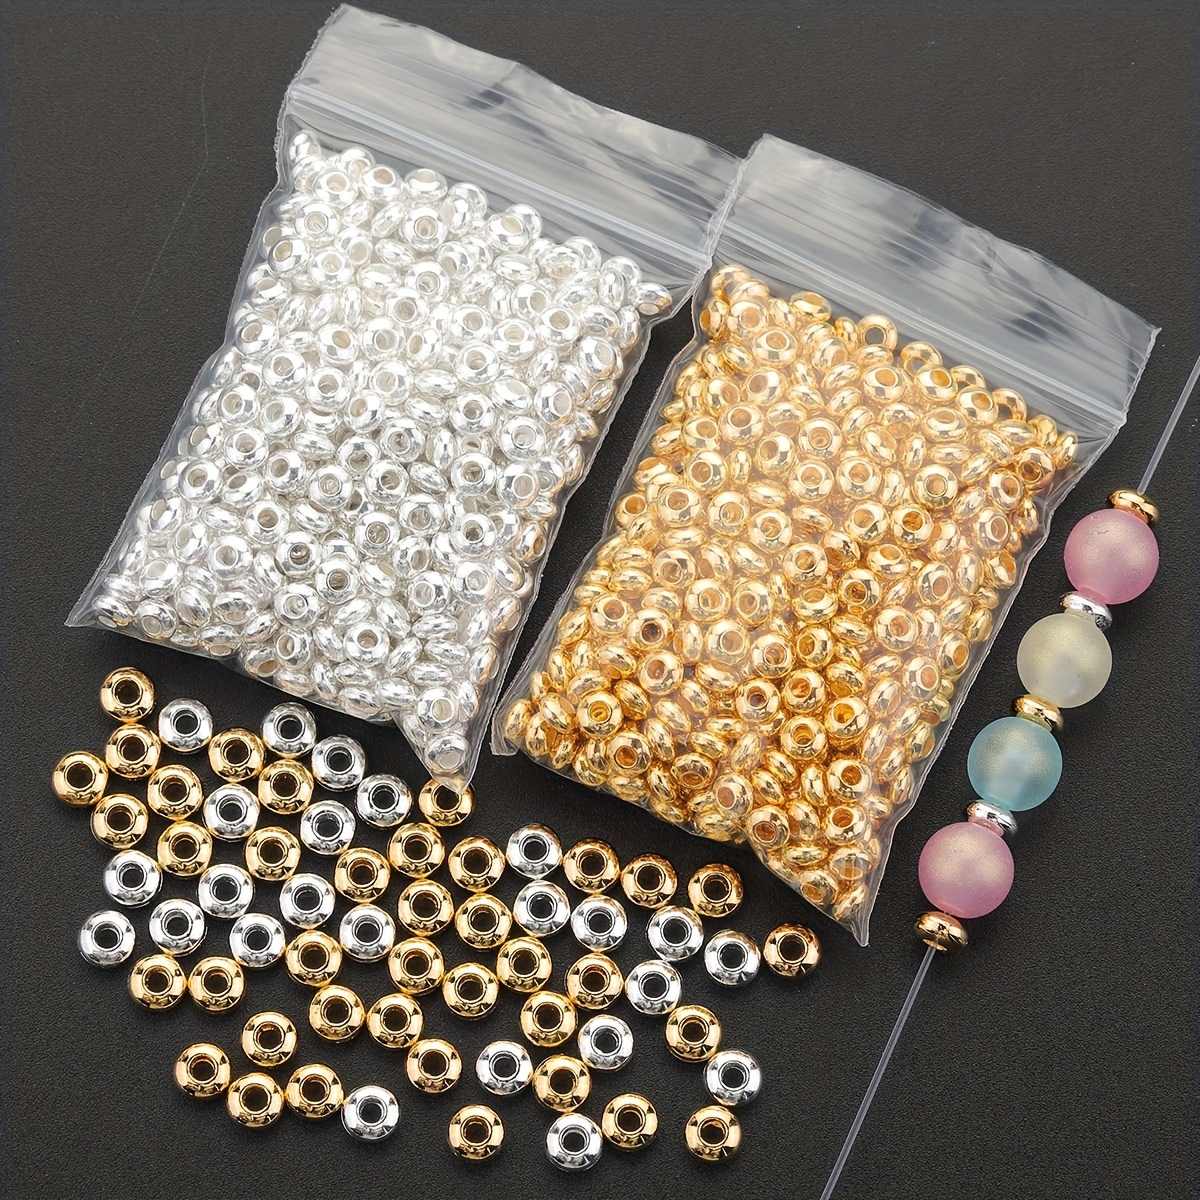 

Shiny Golden & Silvery Alloy Spacer Beads 3/4/5mm - Abacus-inspired Round Bead Separators For Diy Jewelry Making, Bracelet Charms, And Necklace Craft Supplies - Piece Of 100/200/300/400/600